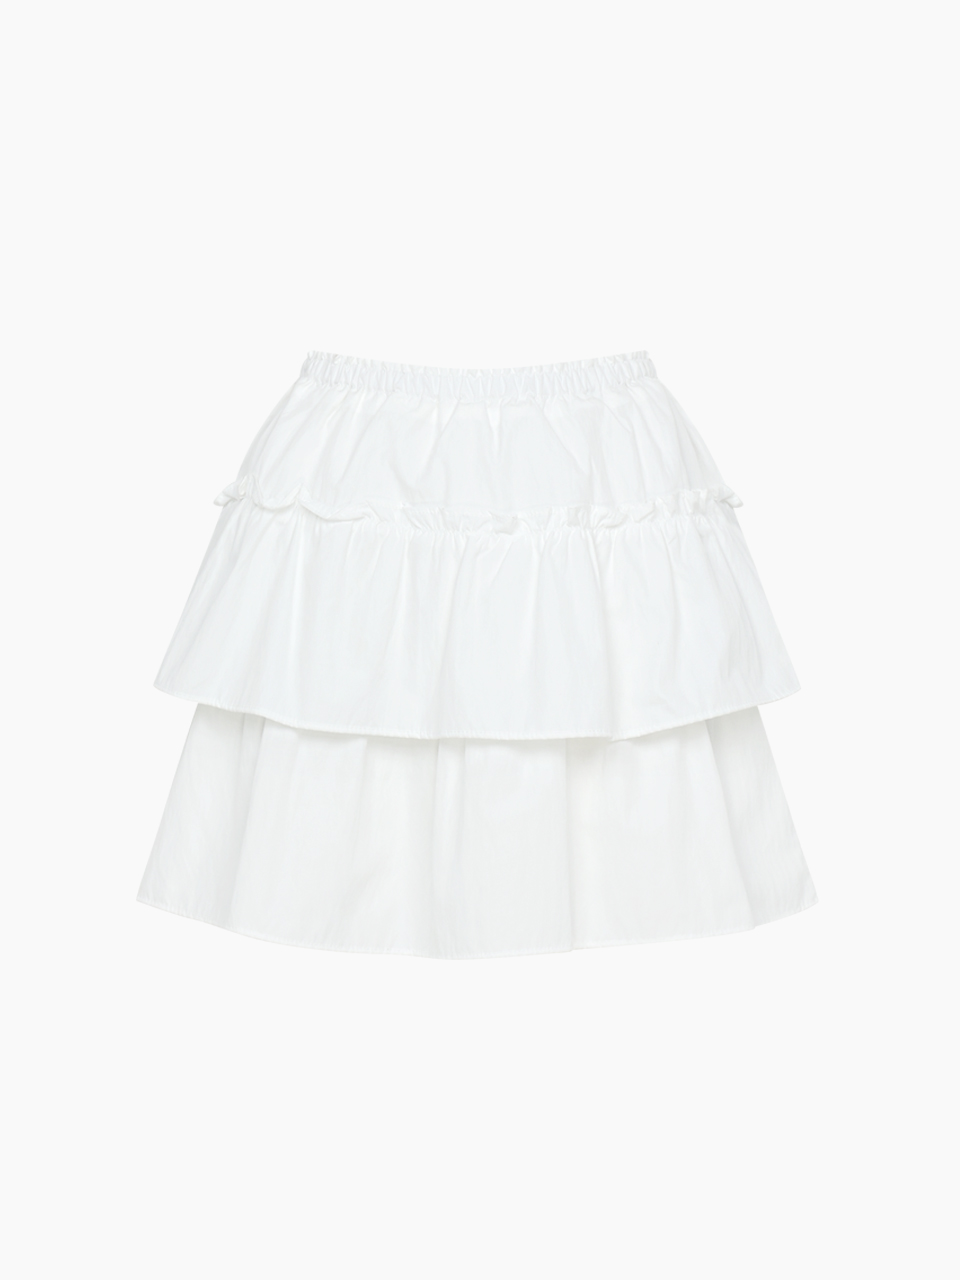 french cancan skirt - white